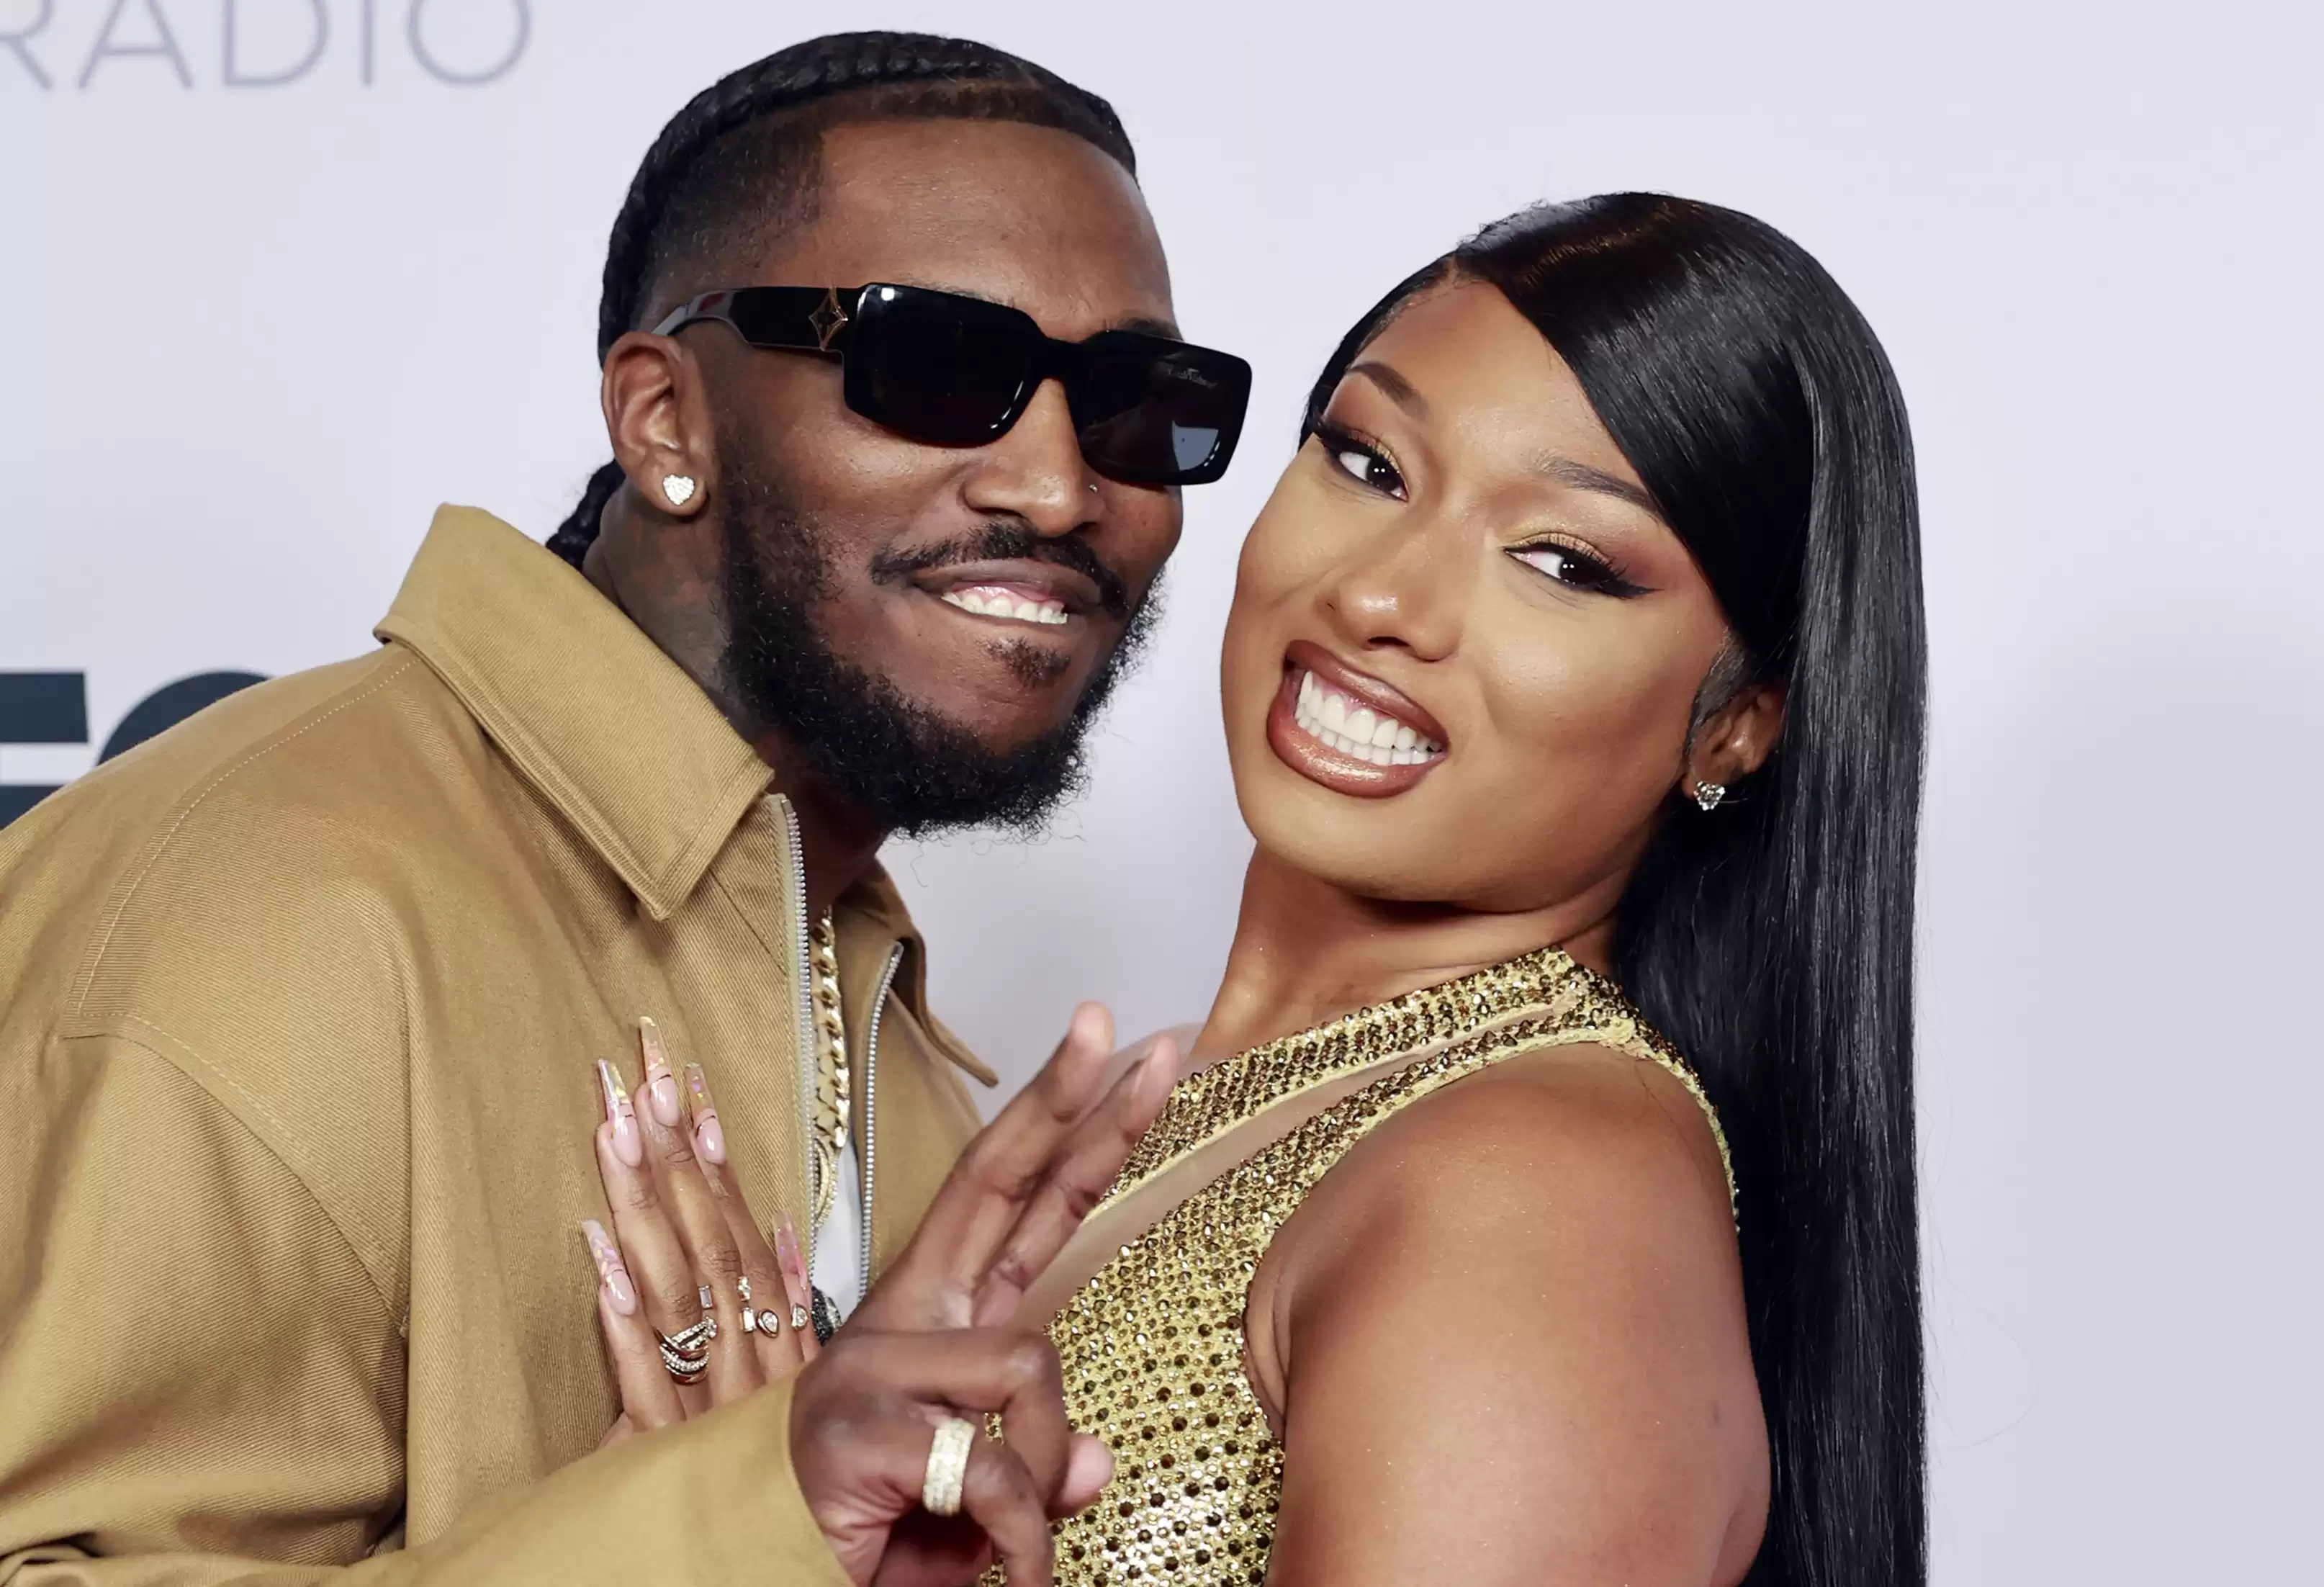 "The ASHY AUDACITY: Social Media DRAGS Megan Thee Stallion's Ex Pardison Fontaine For Allegedly 'Cobra' Creepin' During Relationship"